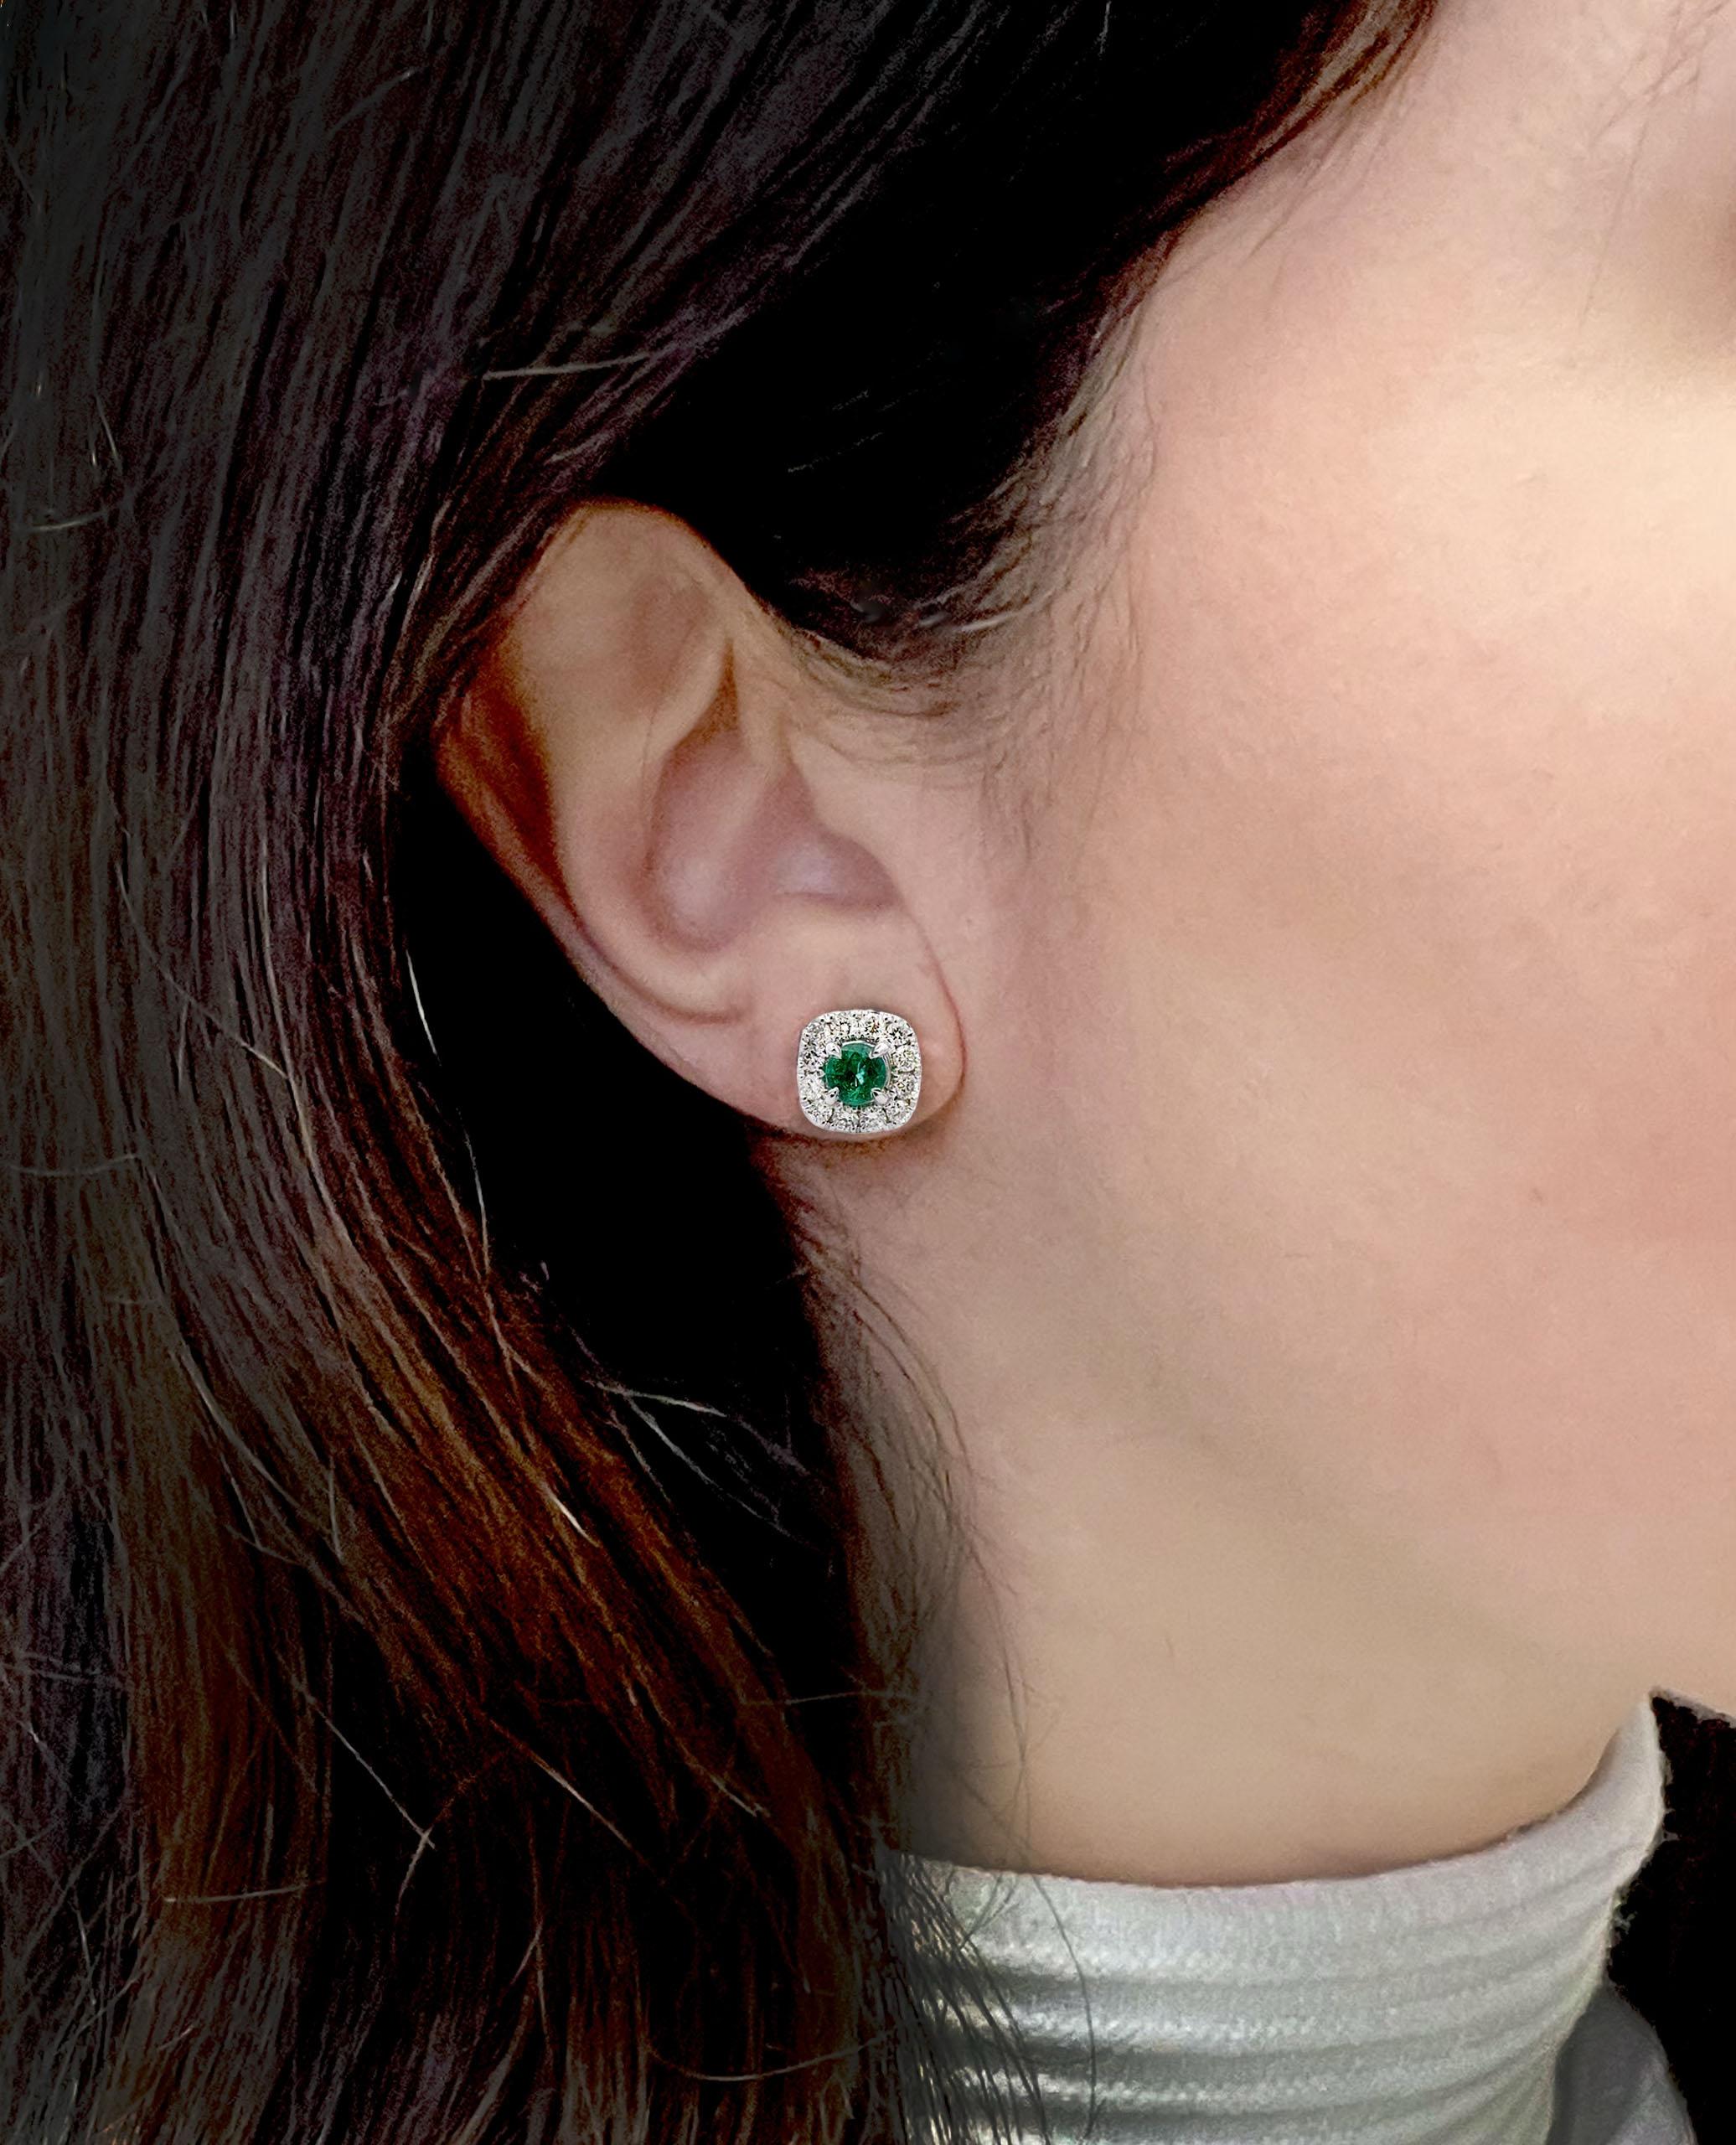 18K white gold stud earrings with two round faceted emeralds 0.70 carats total weight and 24 round faceted diamonds 0.71 carats total weight.

- Diamonds are H color, SI1/SI2 clarity.
- Push back closure.
- Emeralds measure approximately 4.6mm each.